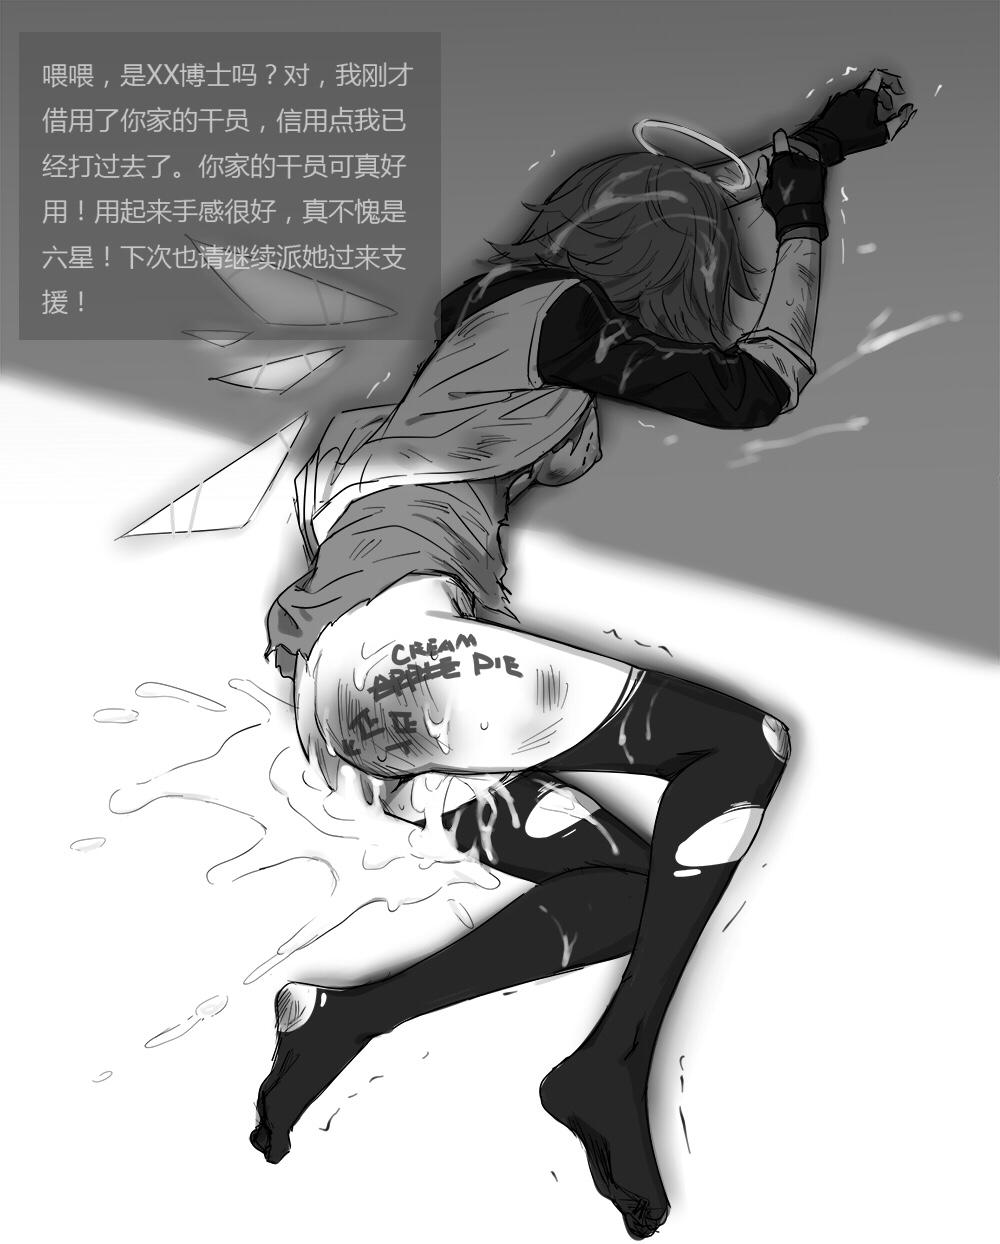 18 Year Old Porn 无能狂怒 - Arknights Female Domination - Page 4